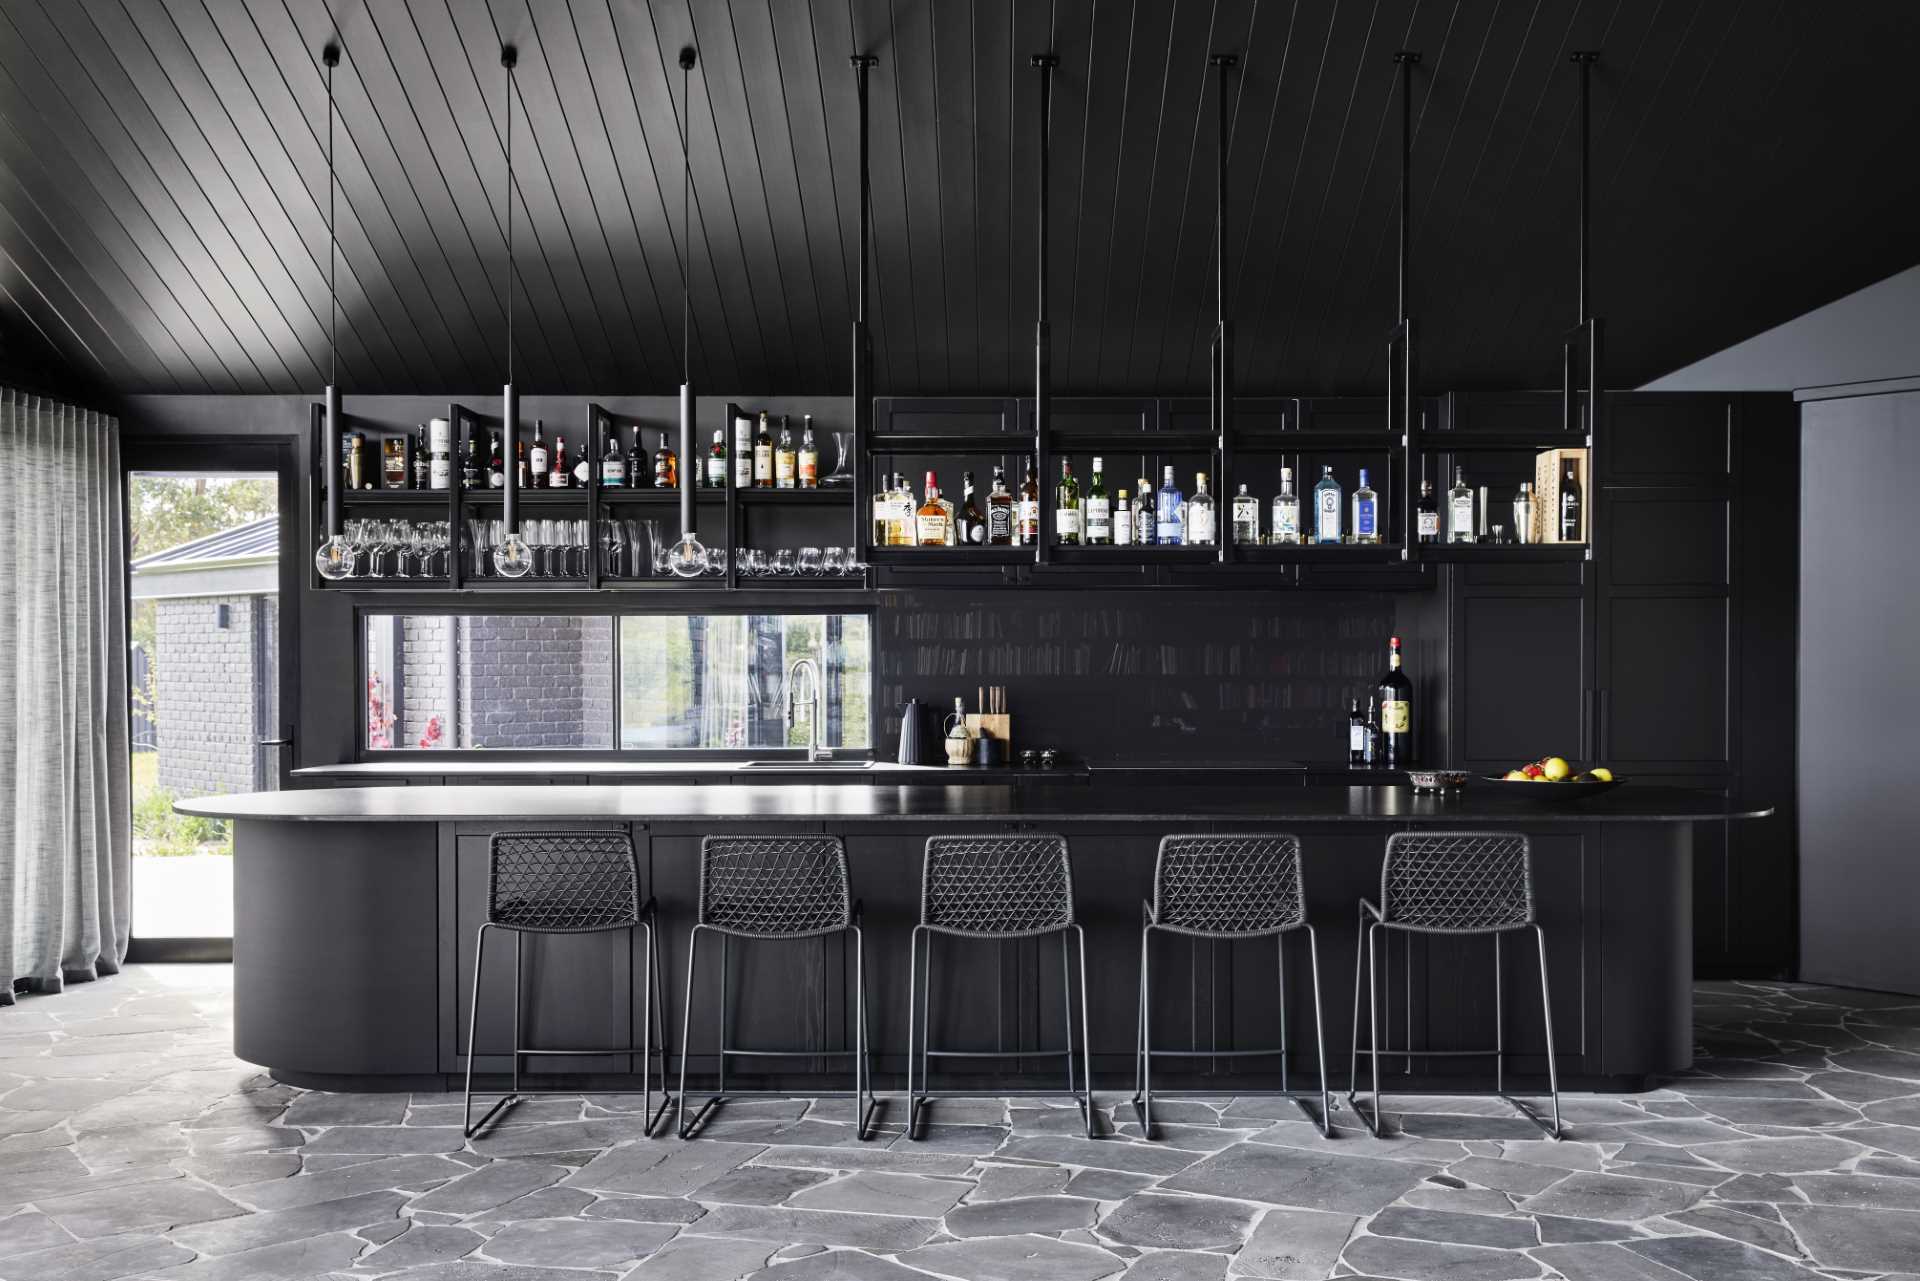 A modern black kitchen that's designed as a full-sized bar with a gentleman's club aesthetic.